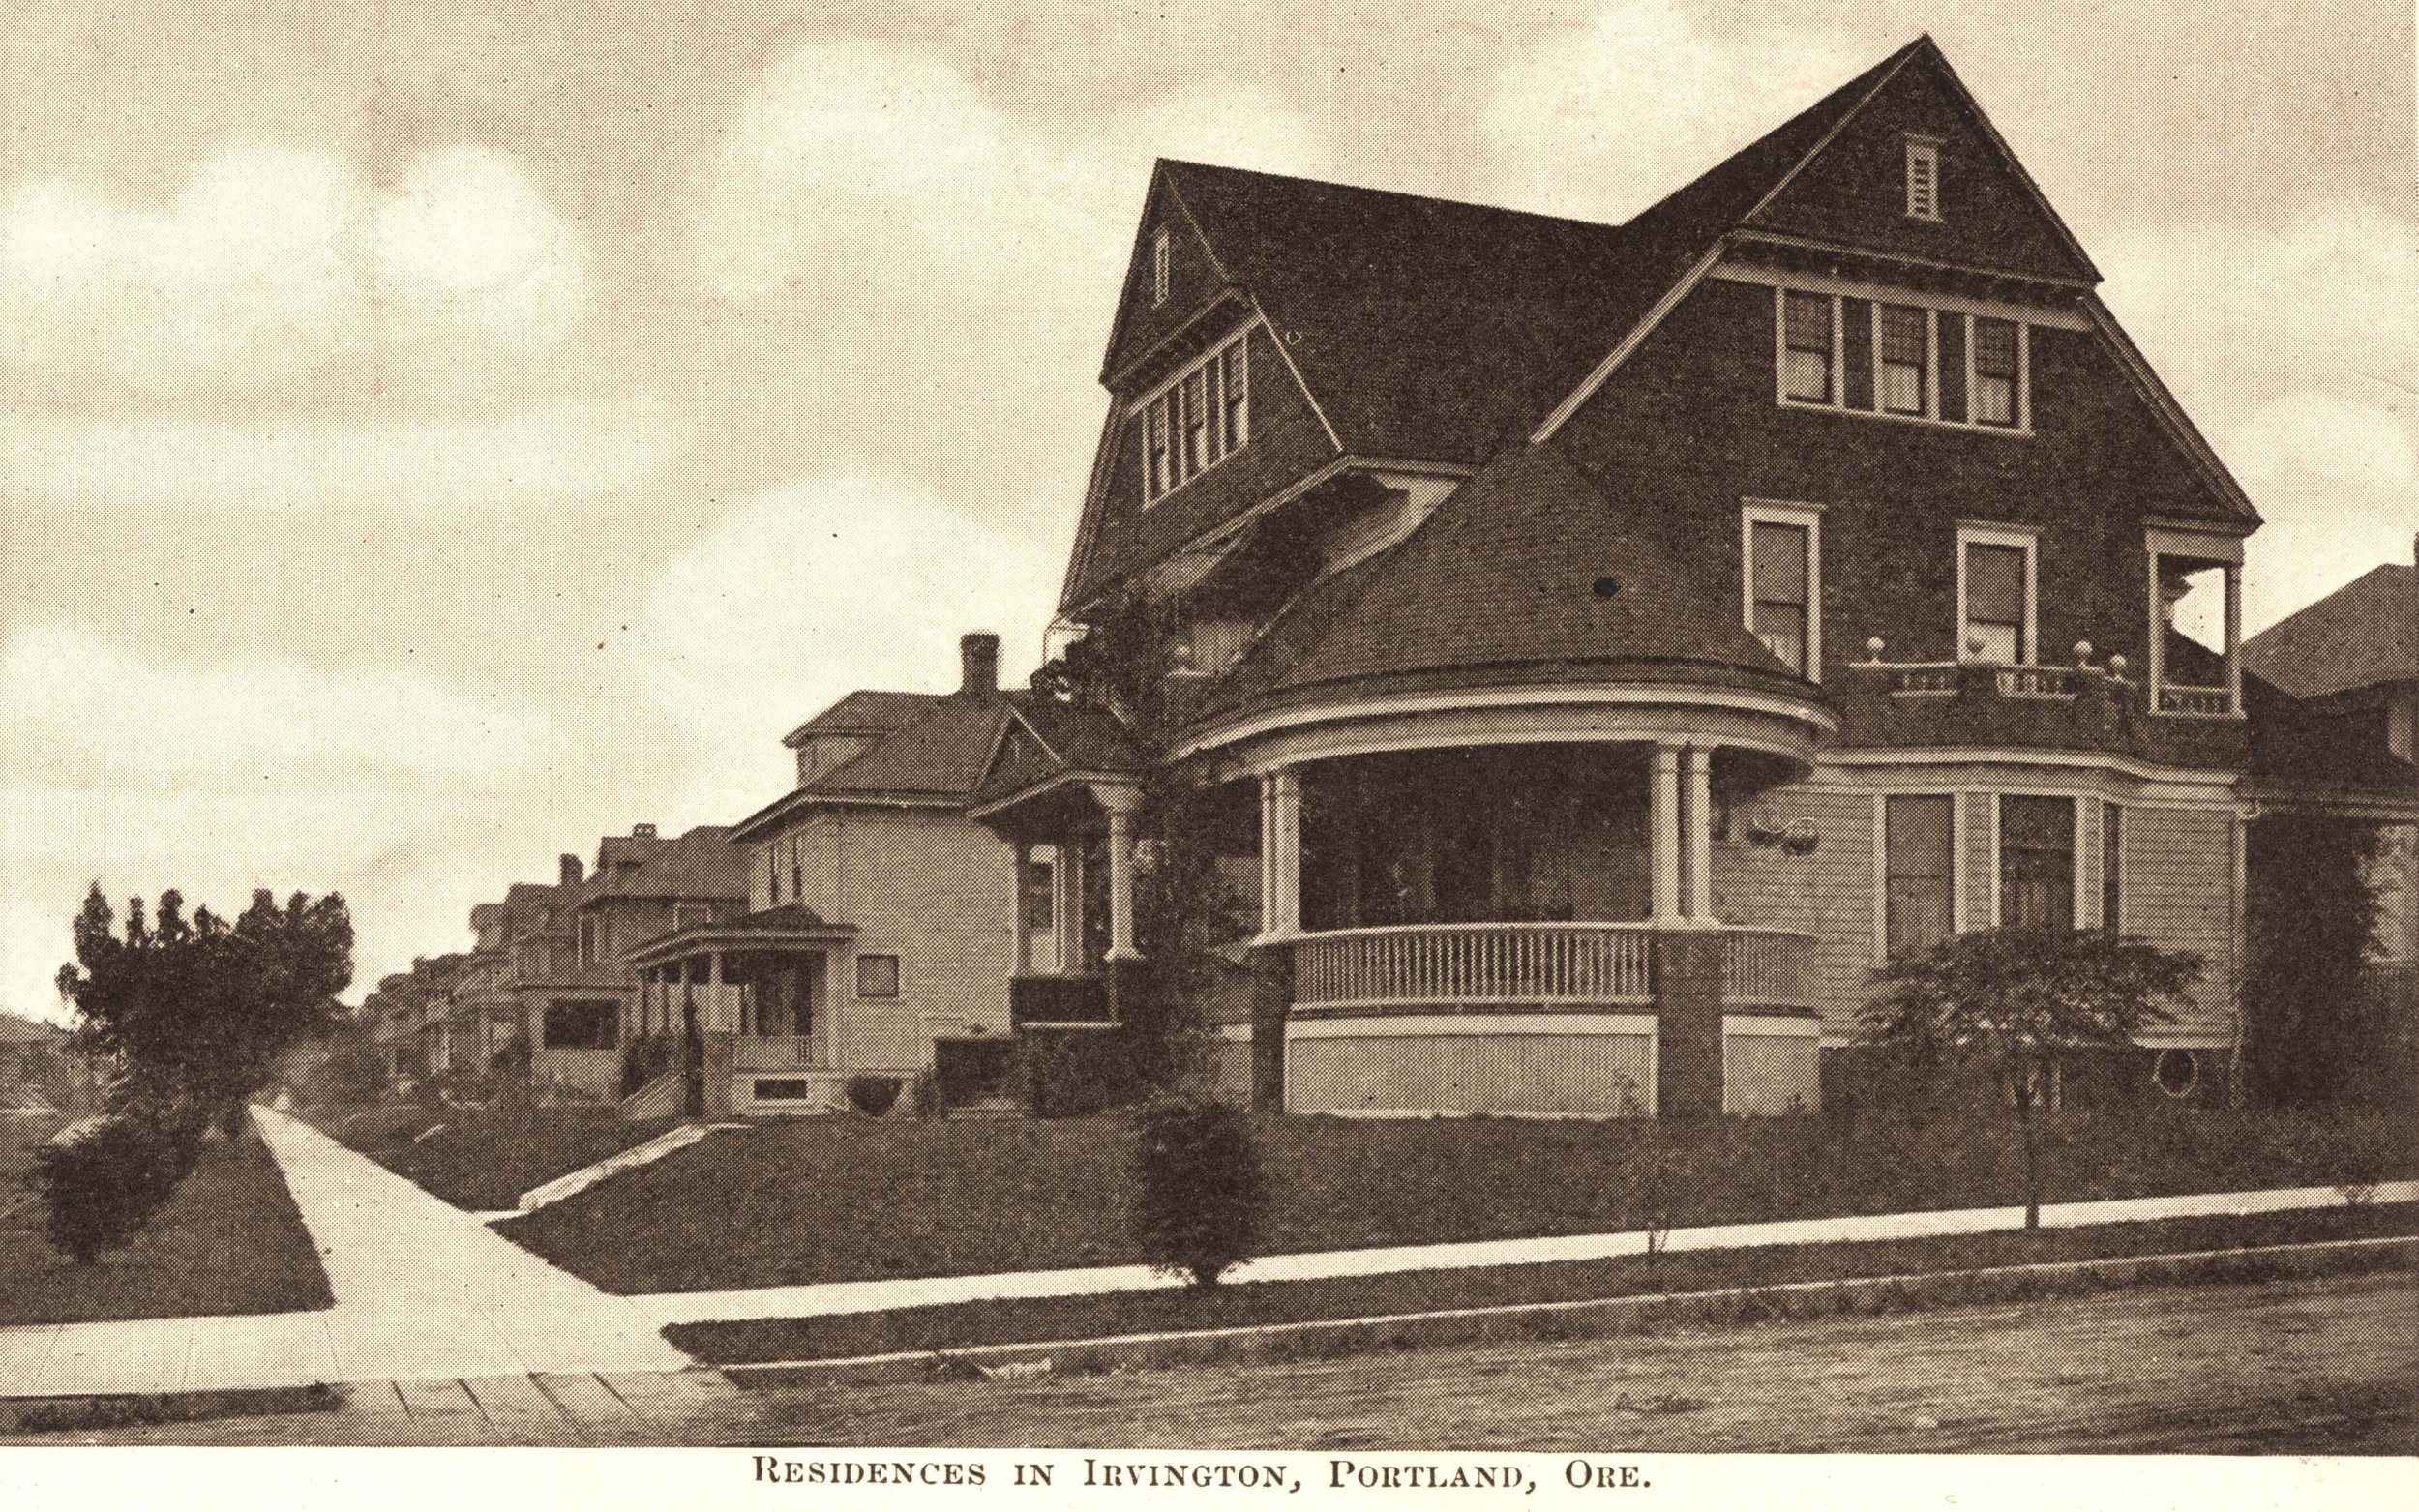  Newly built houses in Irvington show the consistent set back and use of porches to unify the block.&nbsp; 